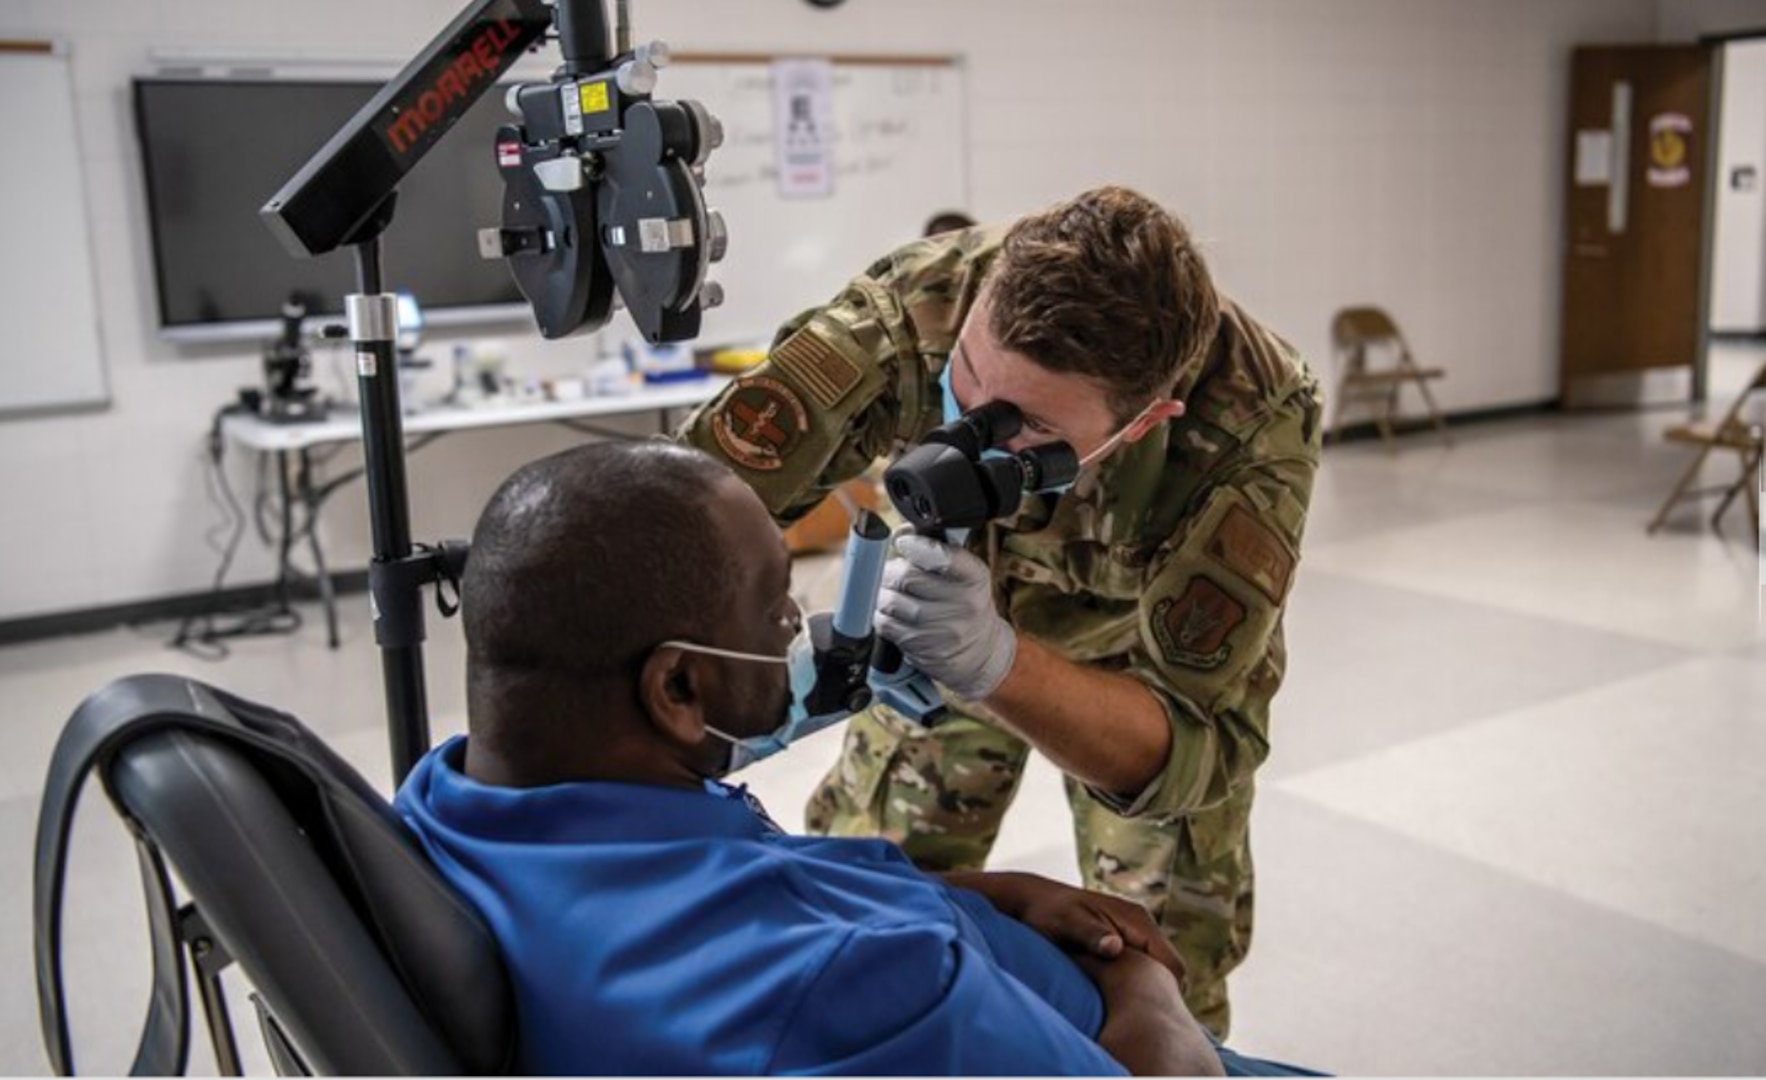 Capt. Adam Fannin, 445th Aerospace Medicine Squadron optometrist, assesses a patient at Jenkins County High School, Waynesboro, Georgia, as part of East Central Georgia Medical Innovative Readiness Training, June 9, 2021. (U.S. Air Force photo by Master Sgt. Patrick O'Reilly)